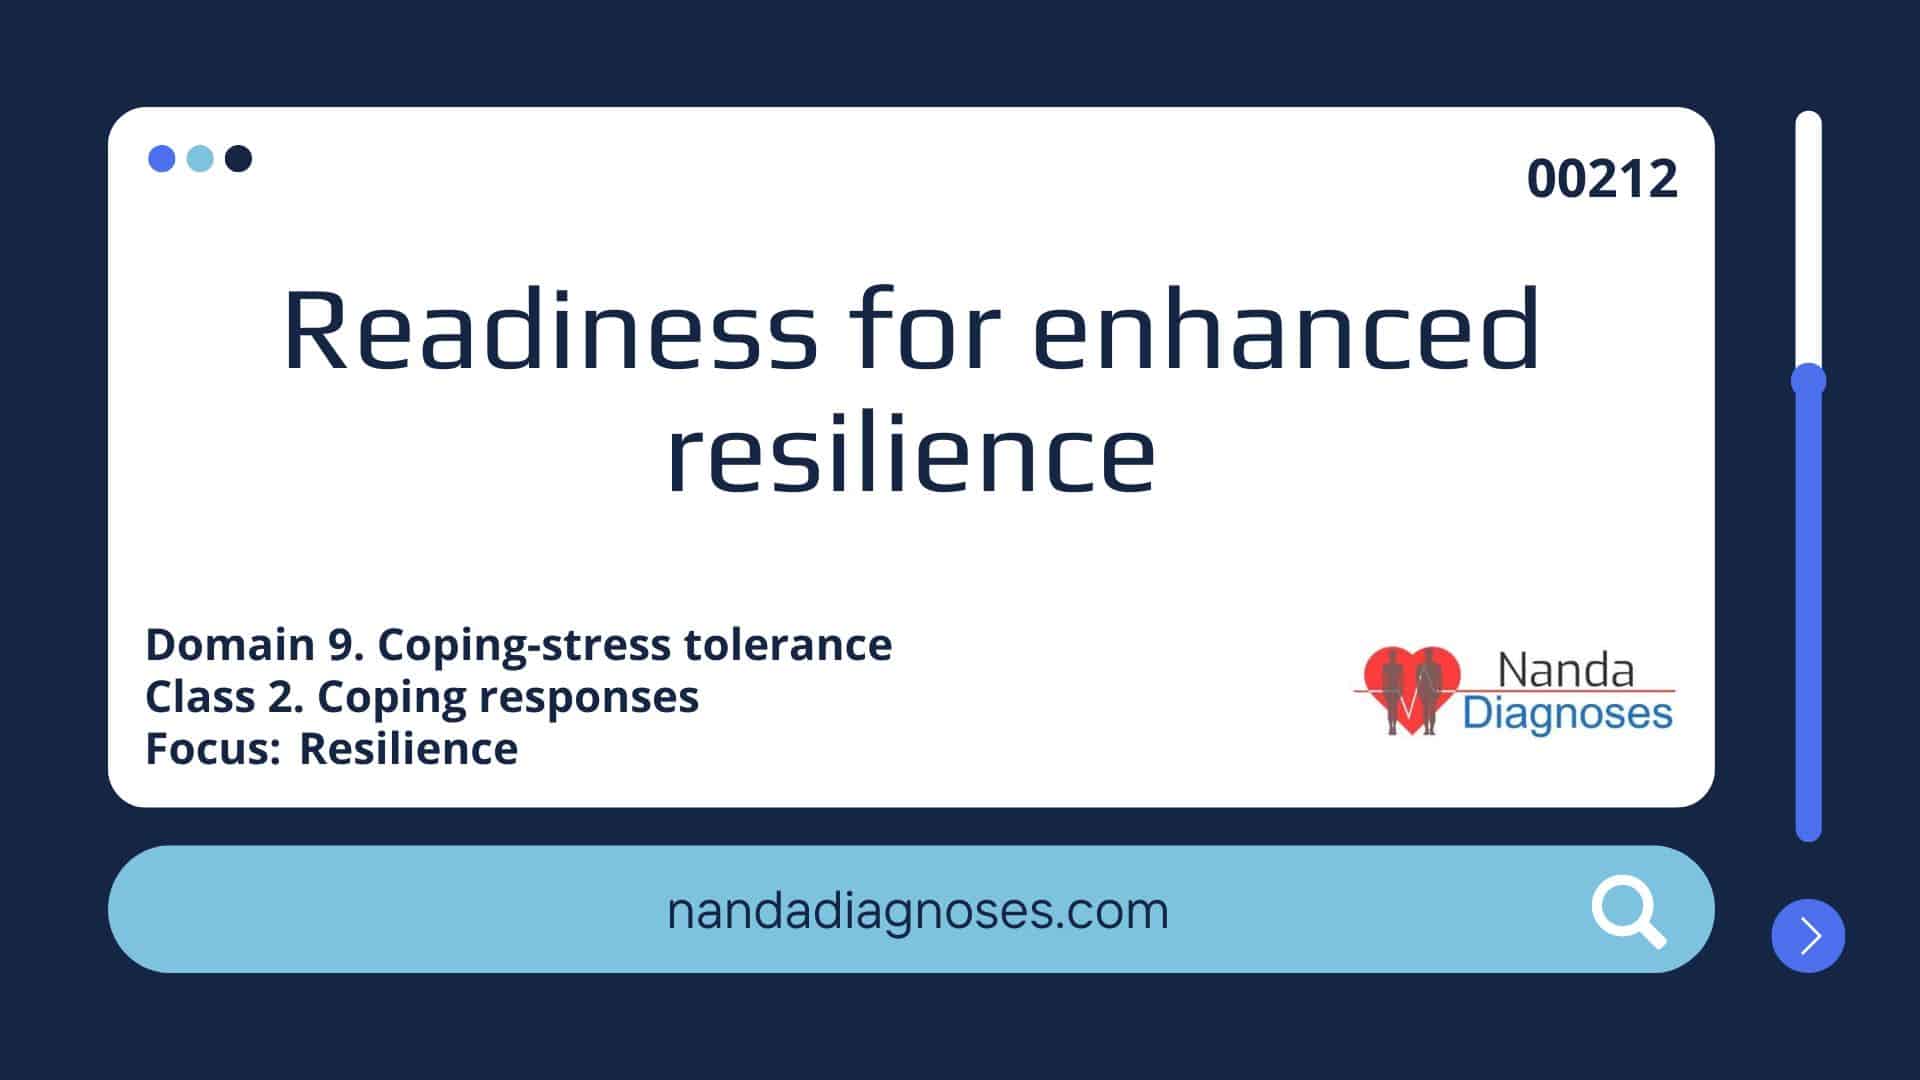 Nursing diagnosis Readiness for enhanced resilience